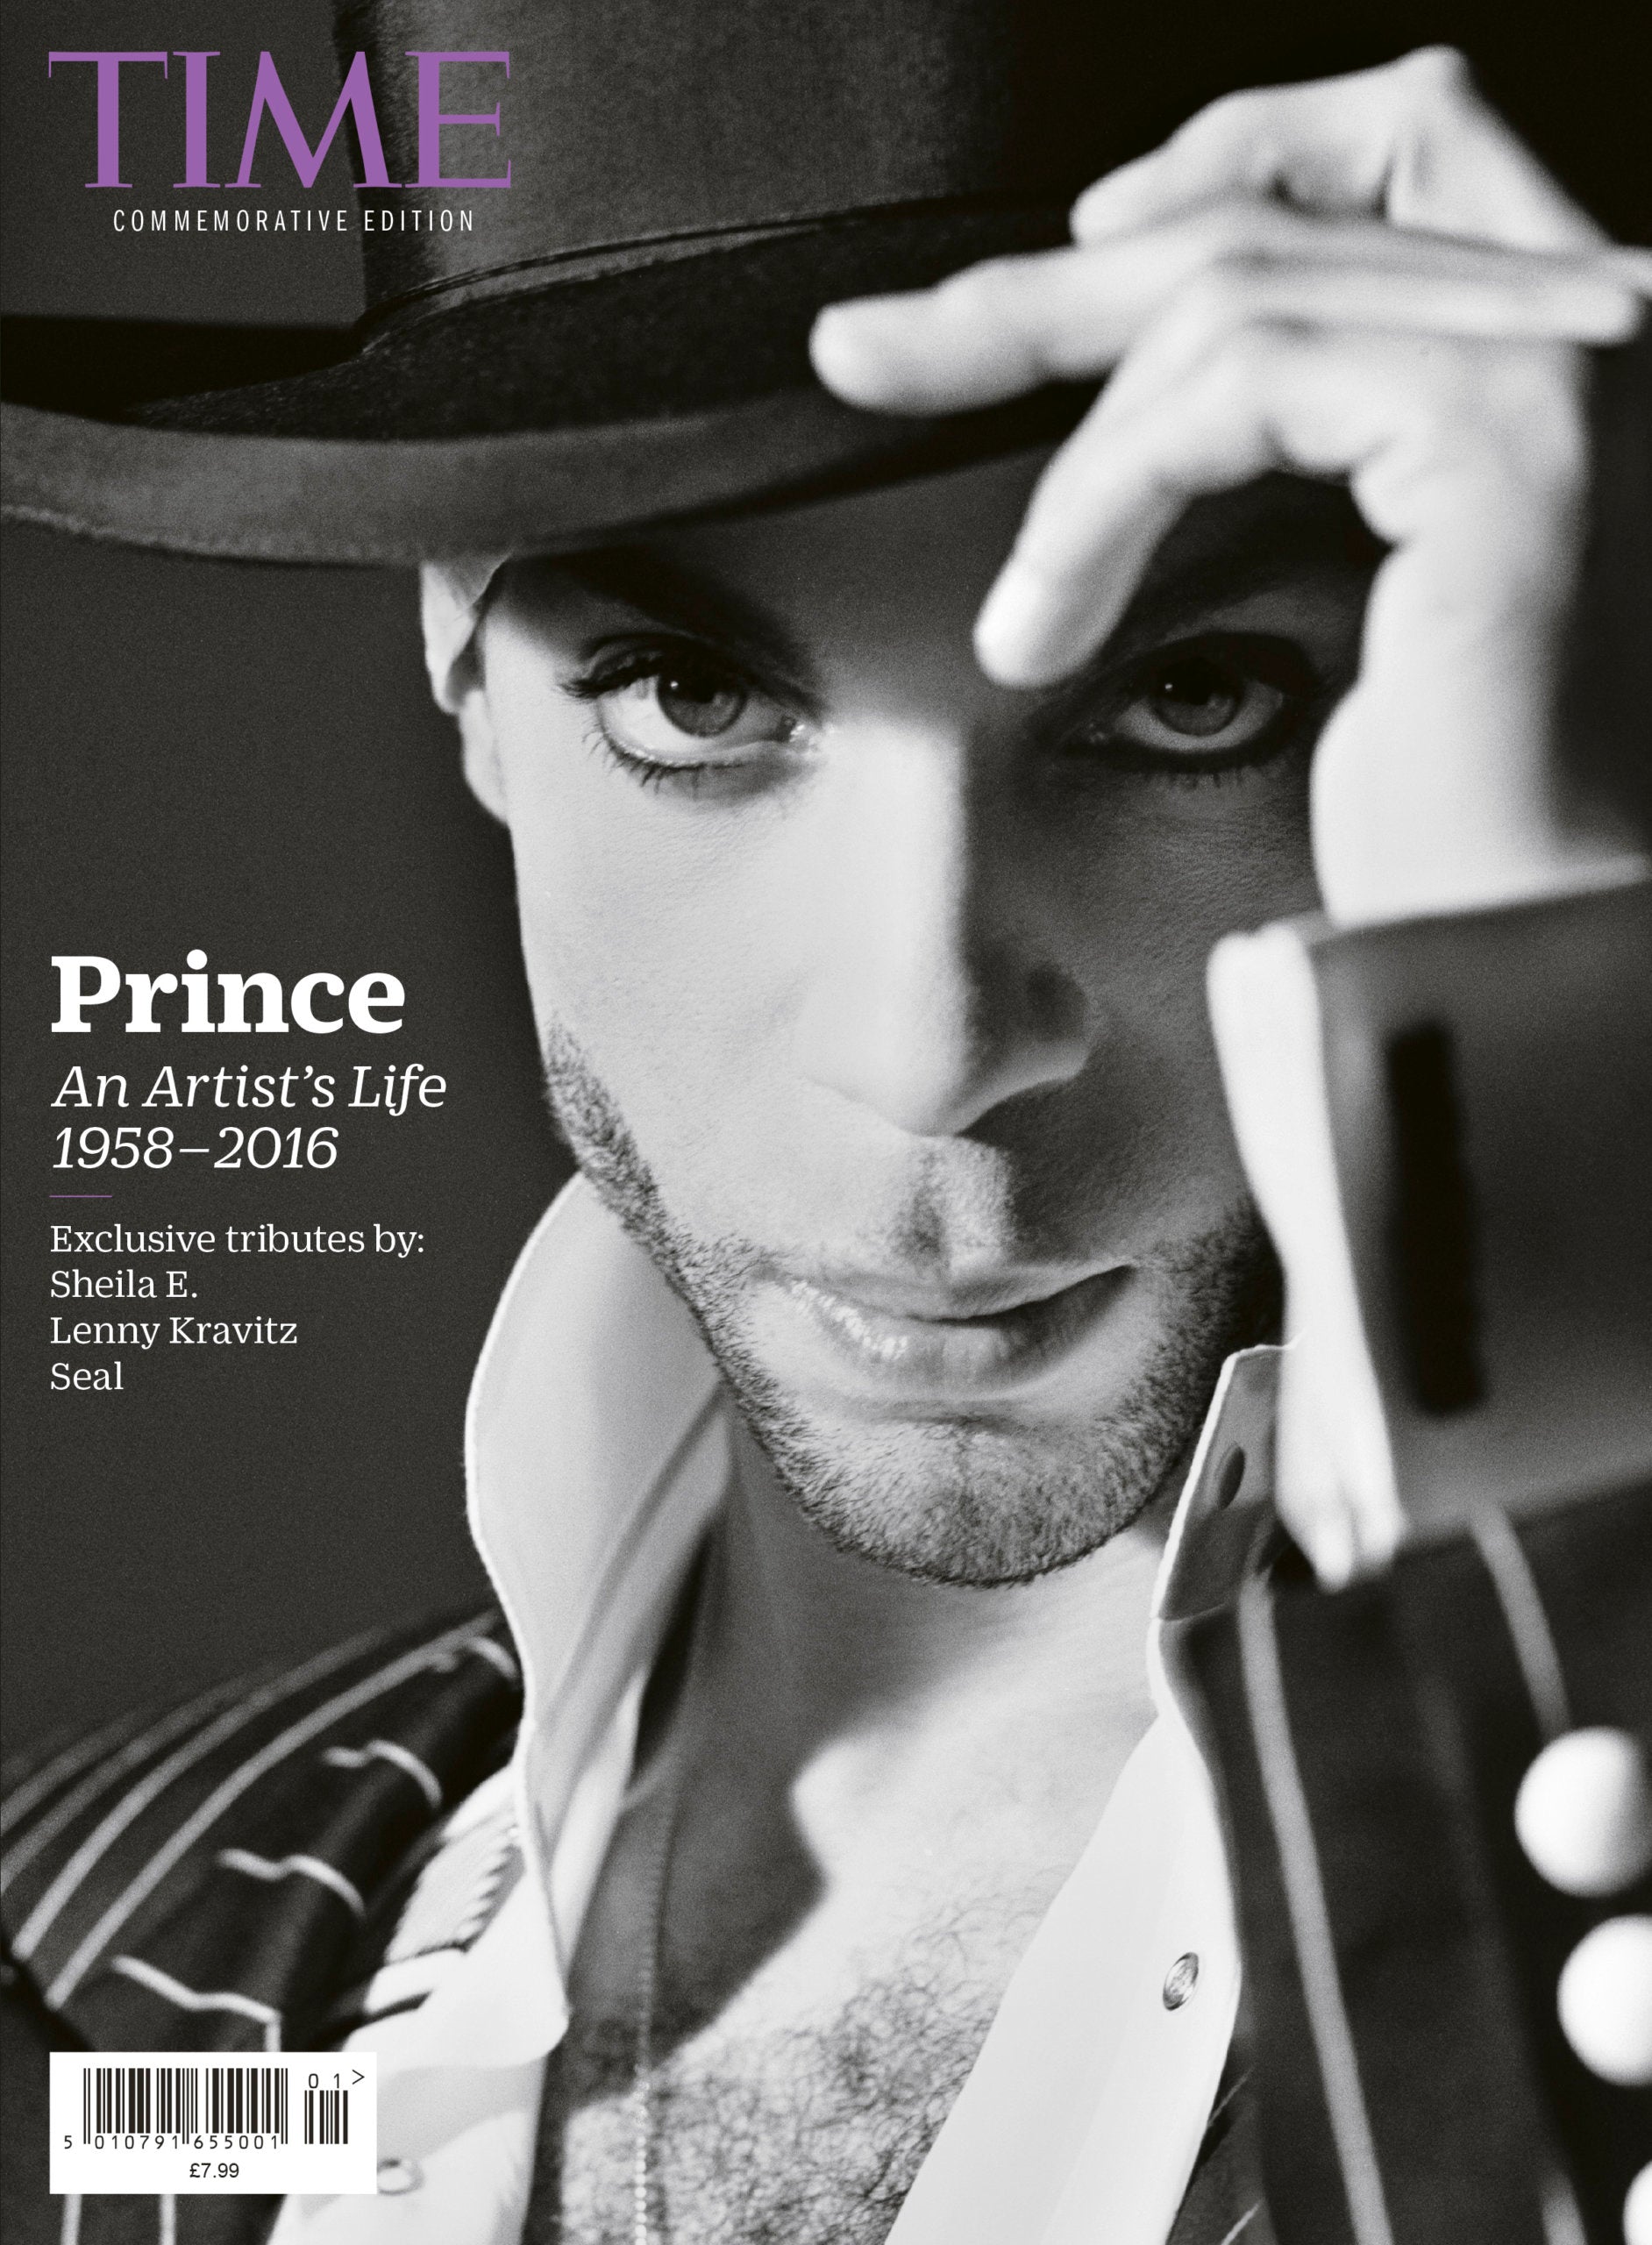 ROLLING STONE MAGAZINE - PRINCE - SPECIAL COLLECTOR'S EDITION 2023